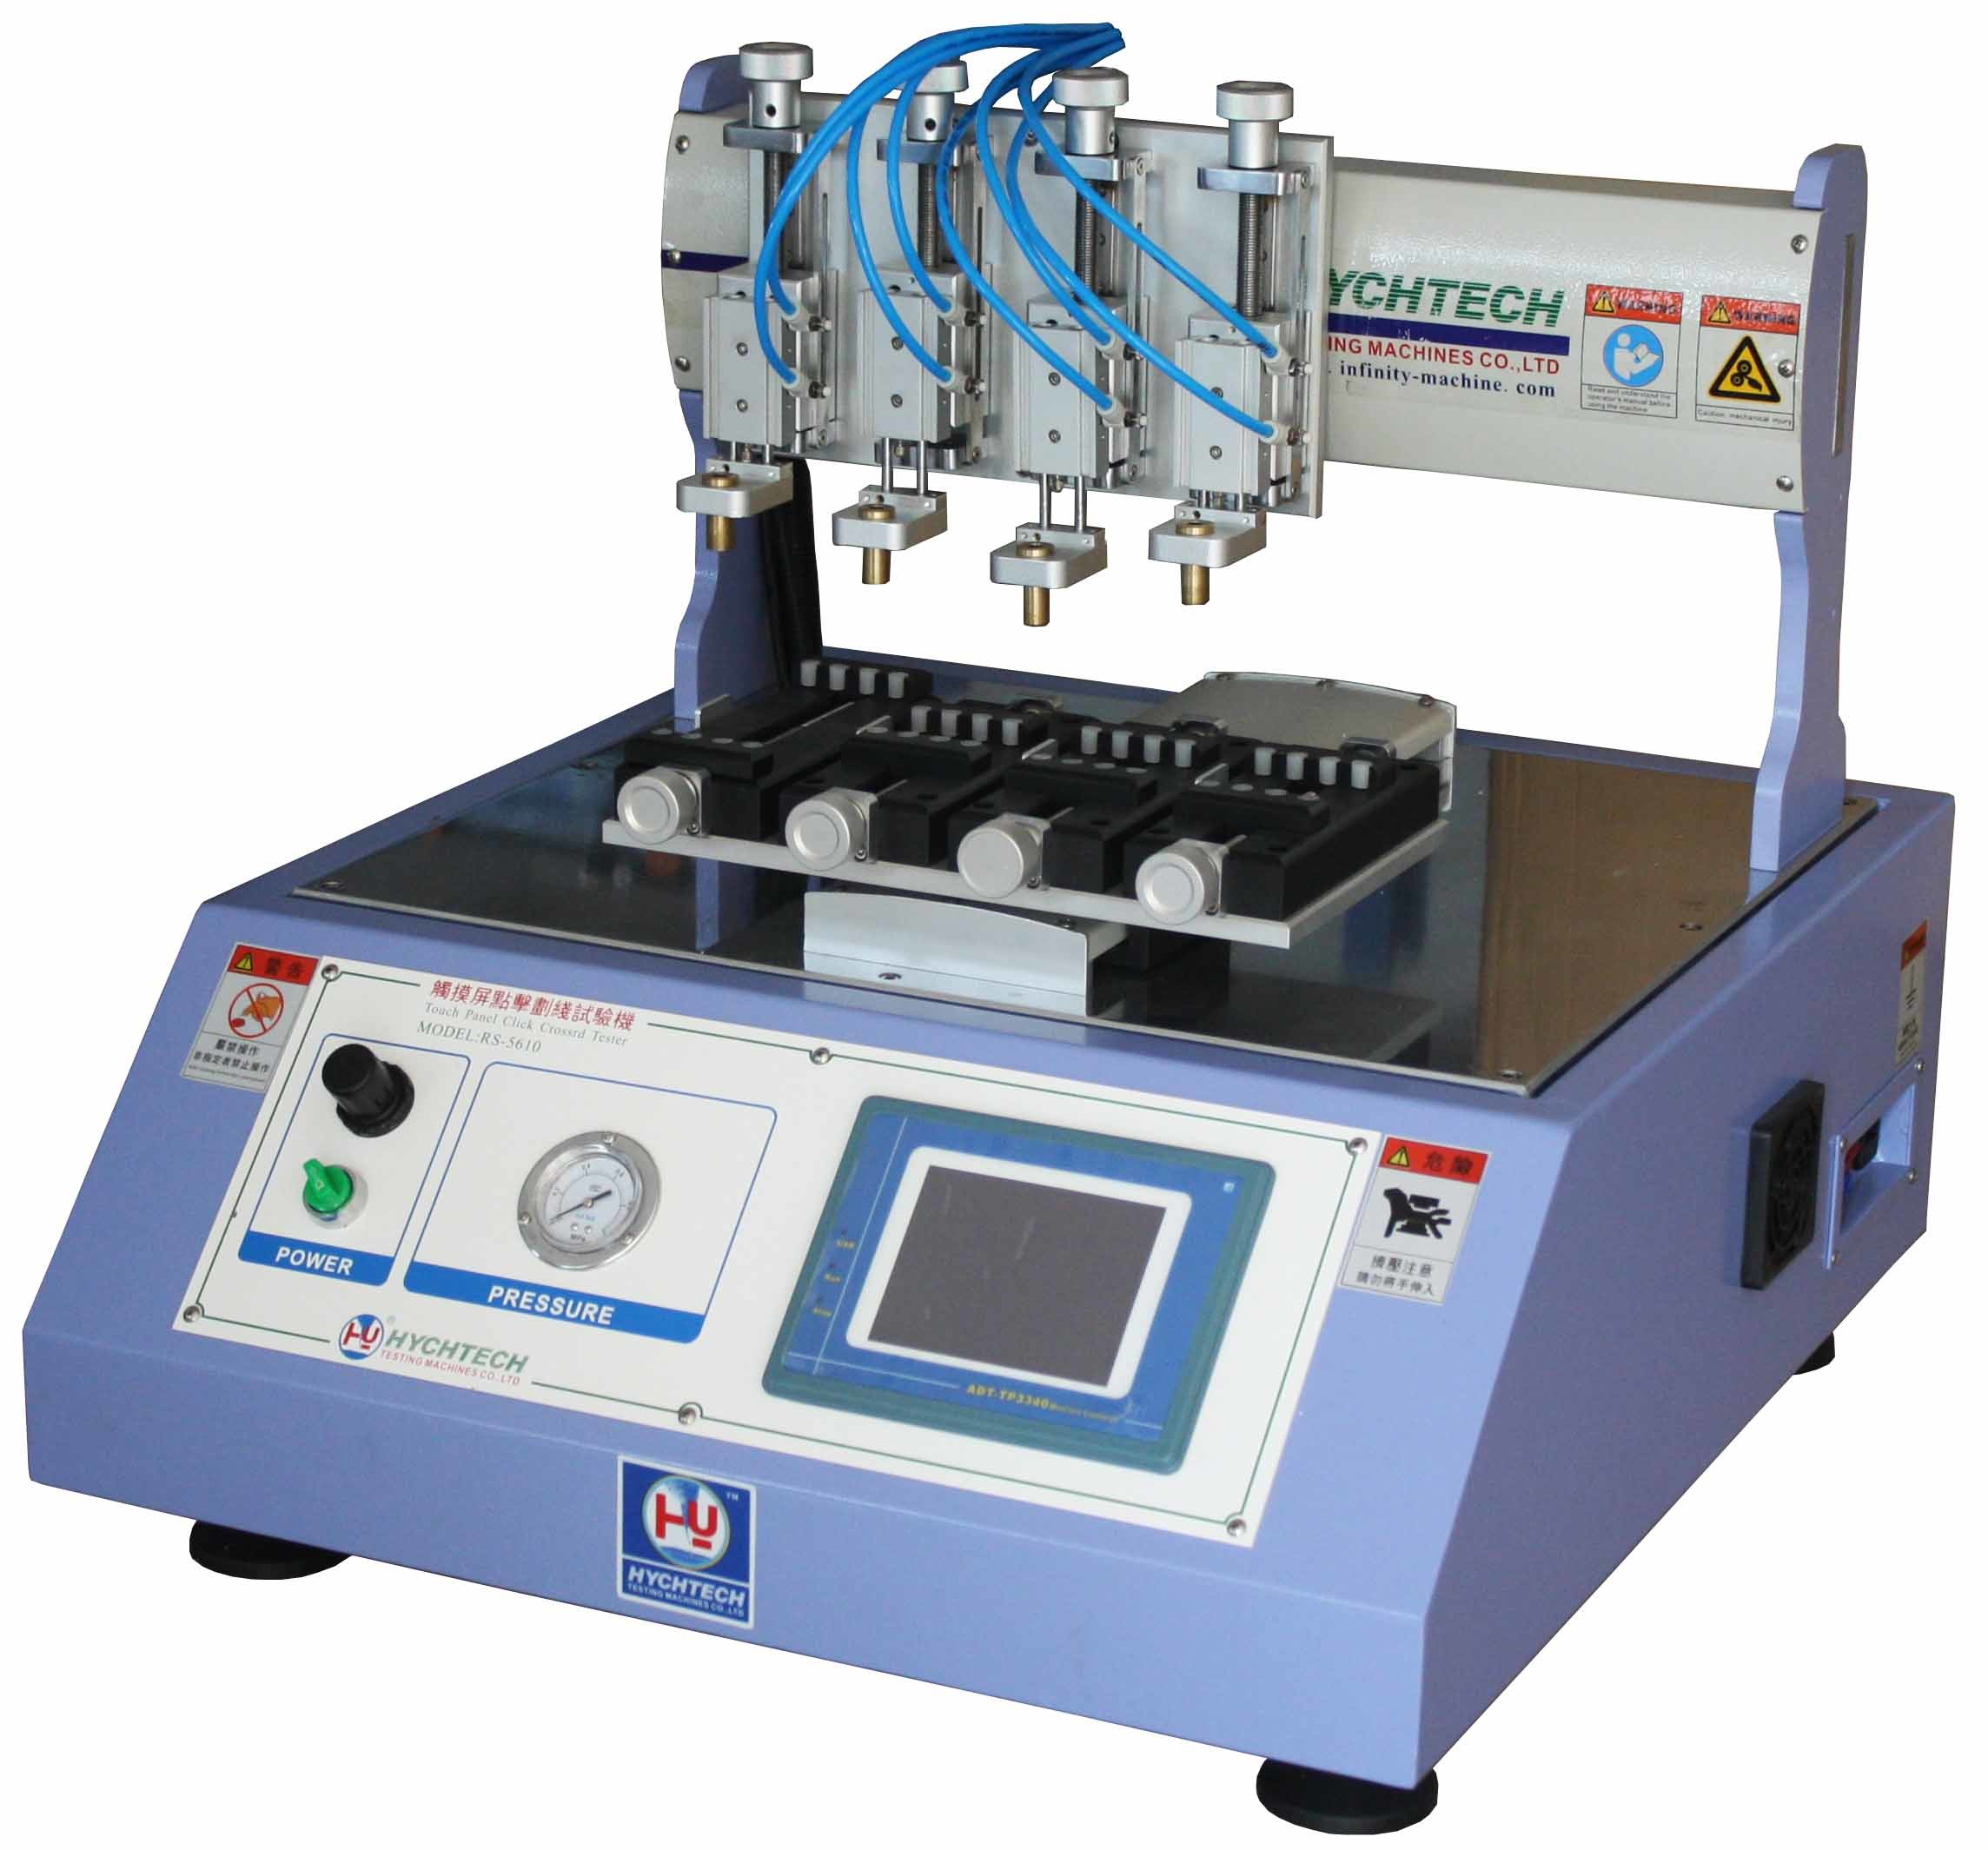 Touch Screen Abrasion Testing Equipment Press Test 0 - 200 mm/sec